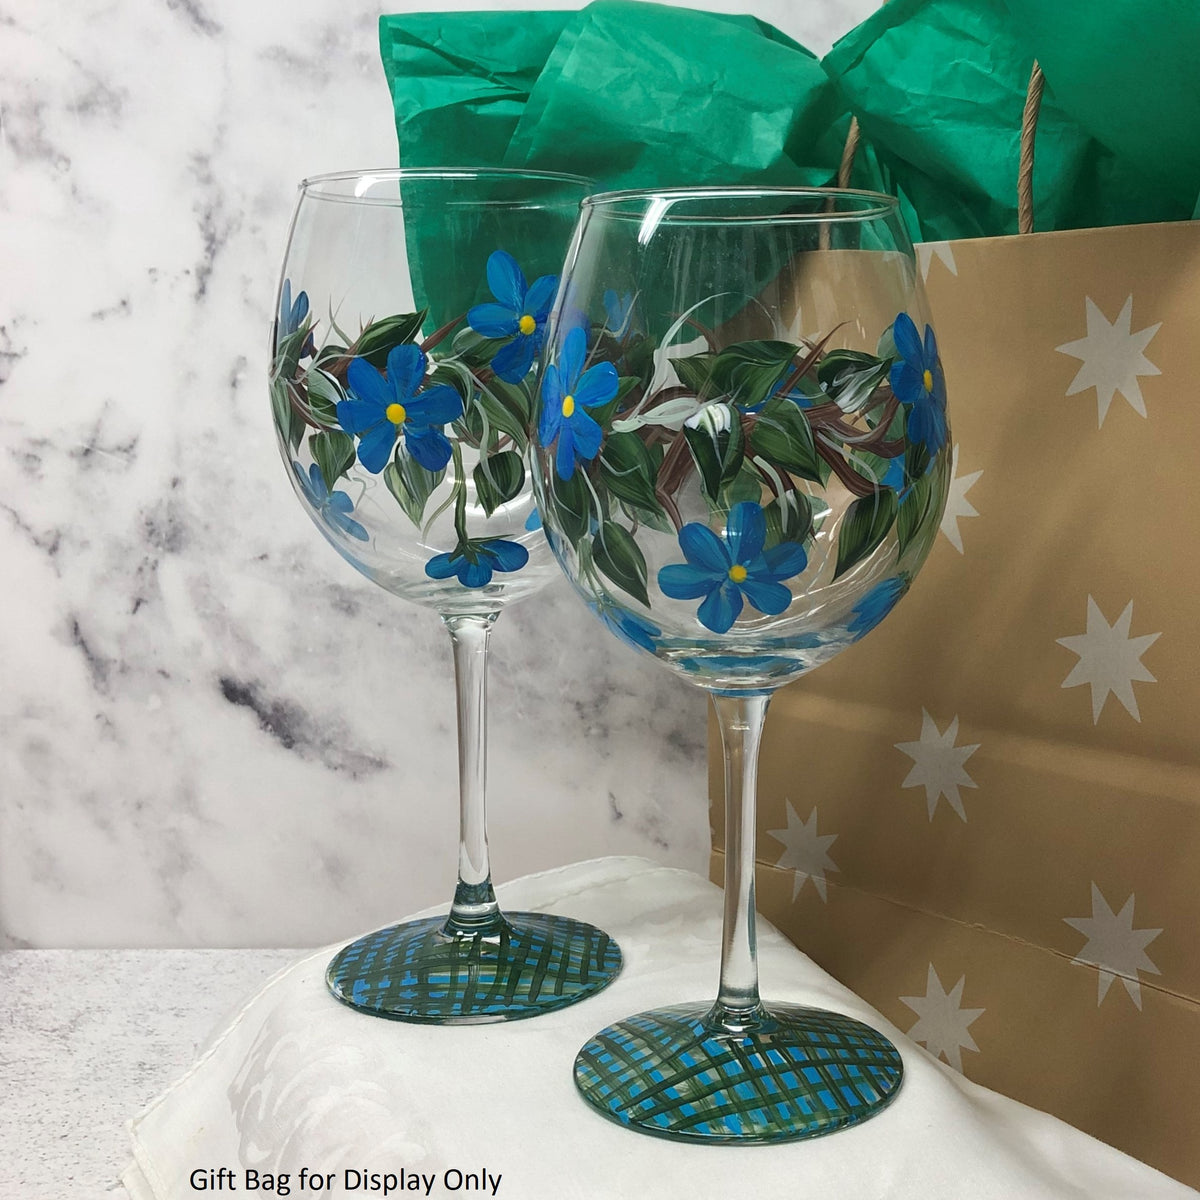 Hand Painted Blue Floral Wine Glasses (Set of 2)